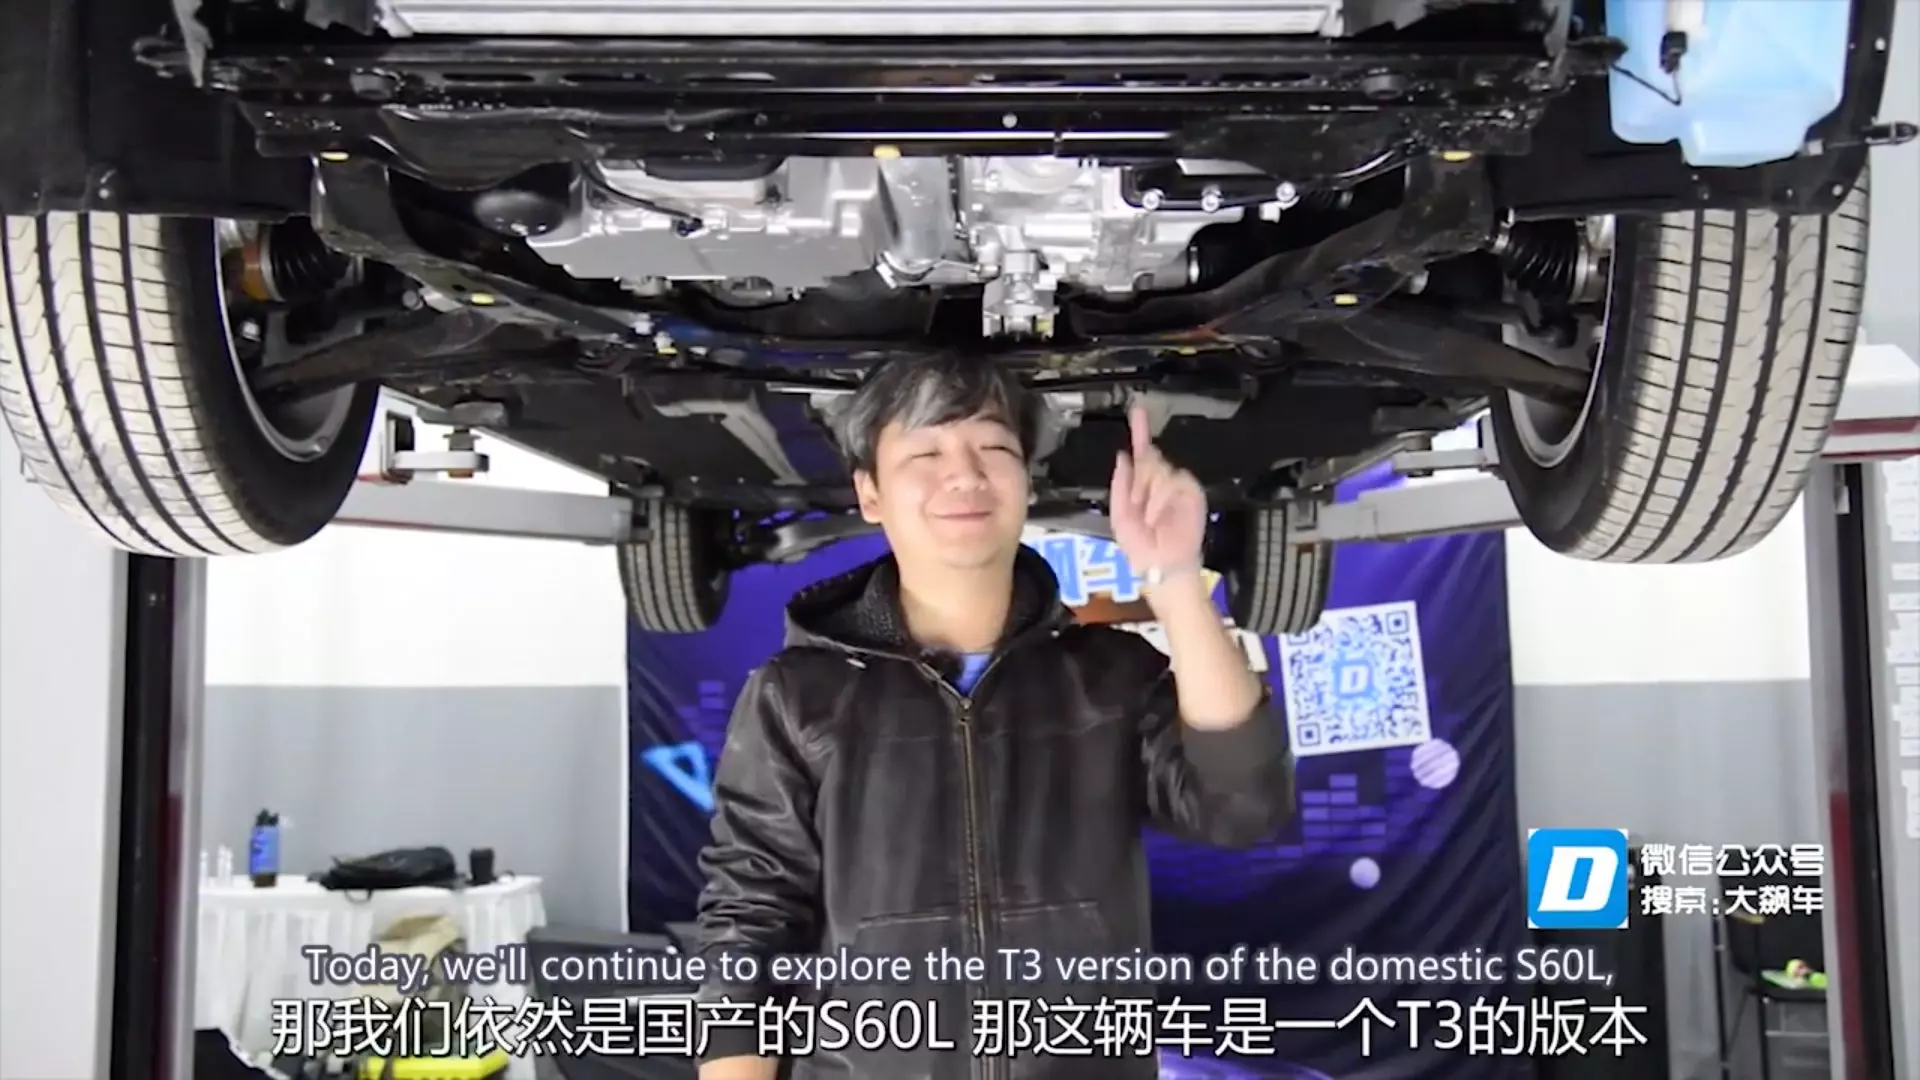 Check Out These Detailed Automotive Engineering Breakdowns From A Chinese Perspective